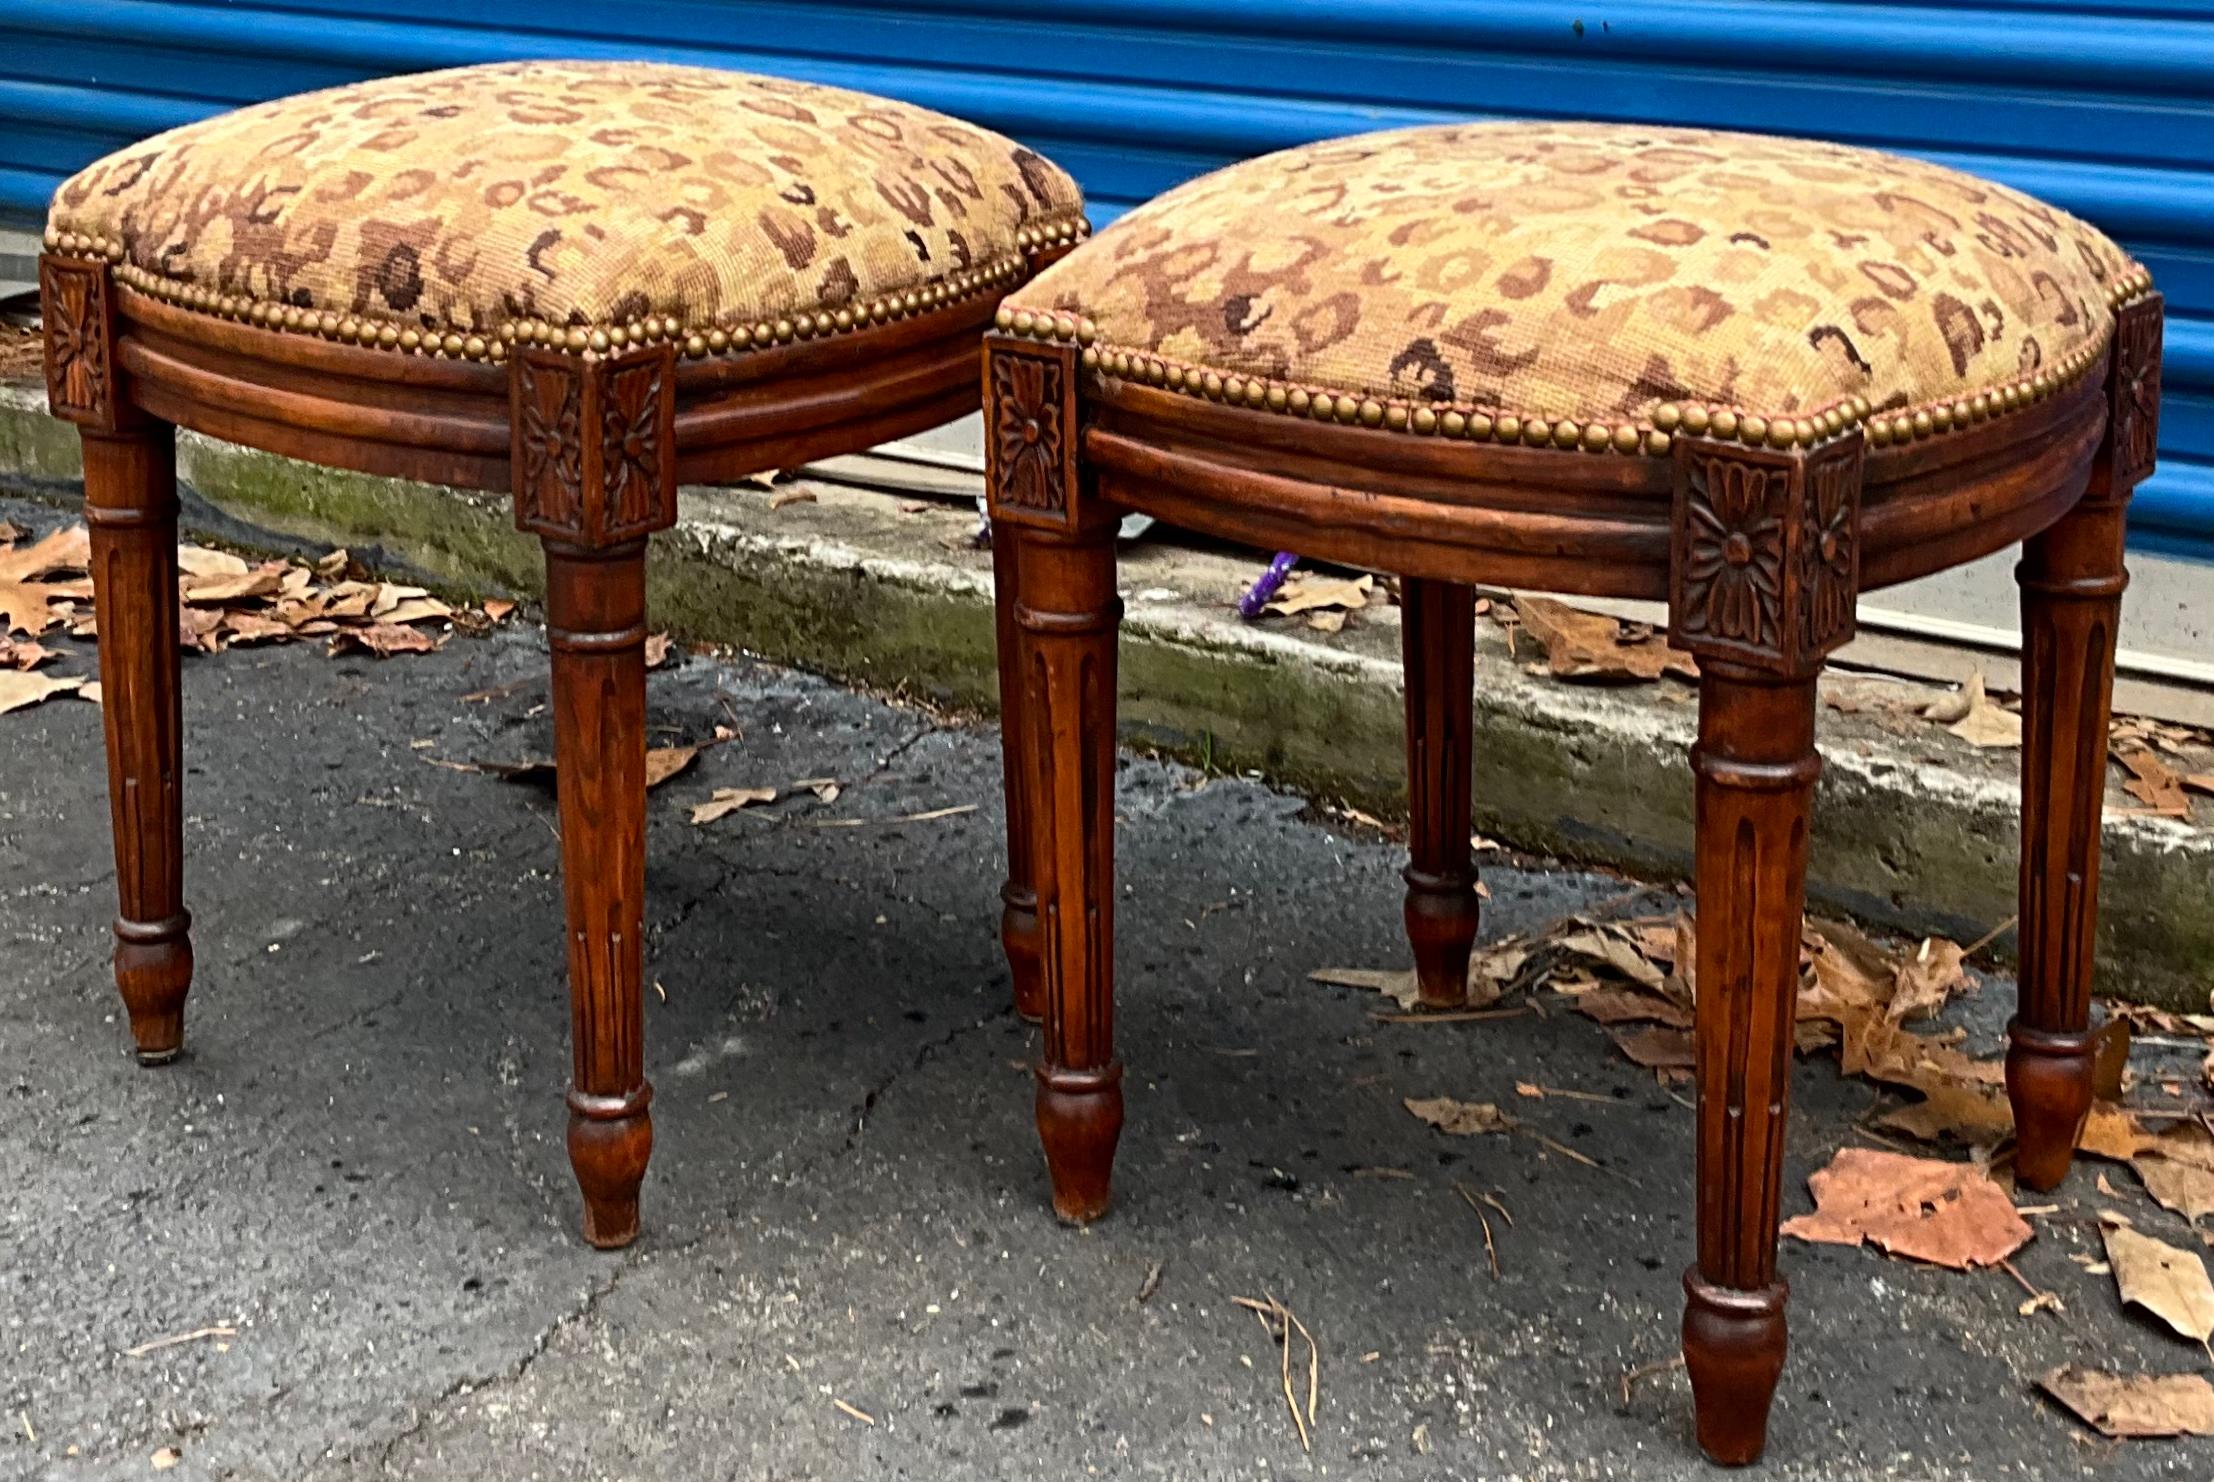 This is a pair of French style carved fruitwood ottomans in leopard needlepoint. They date to the later part of the 20th century and are unmarked.